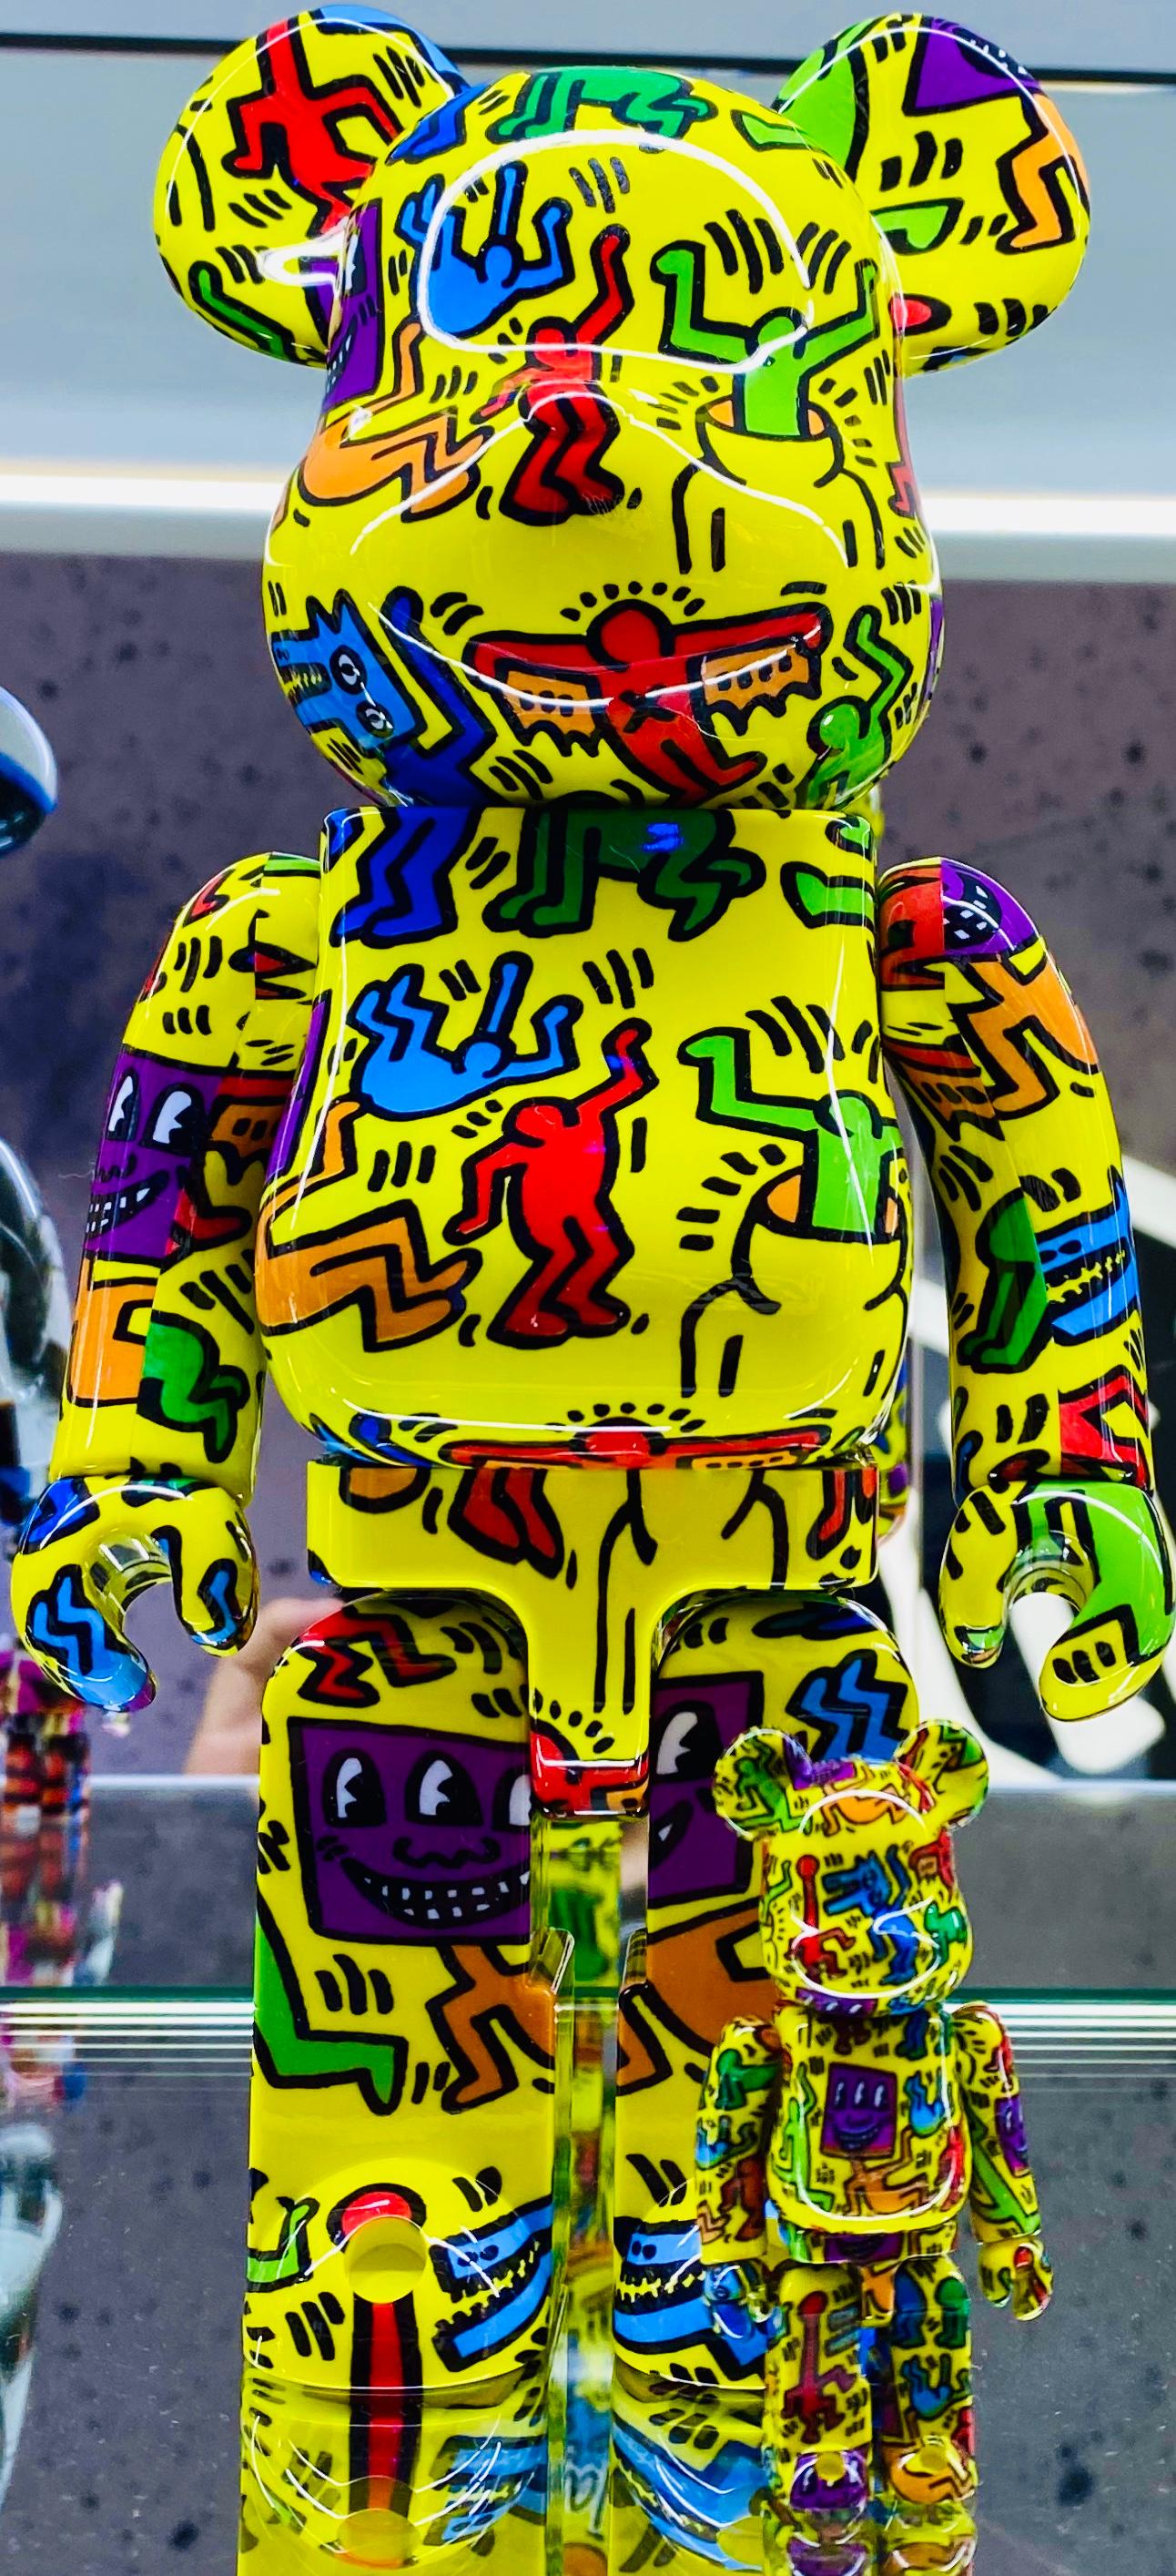 Keith Haring Bearbrick 400% Companion (Haring BE@RBRICK) - Street Art Print by (after) Keith Haring